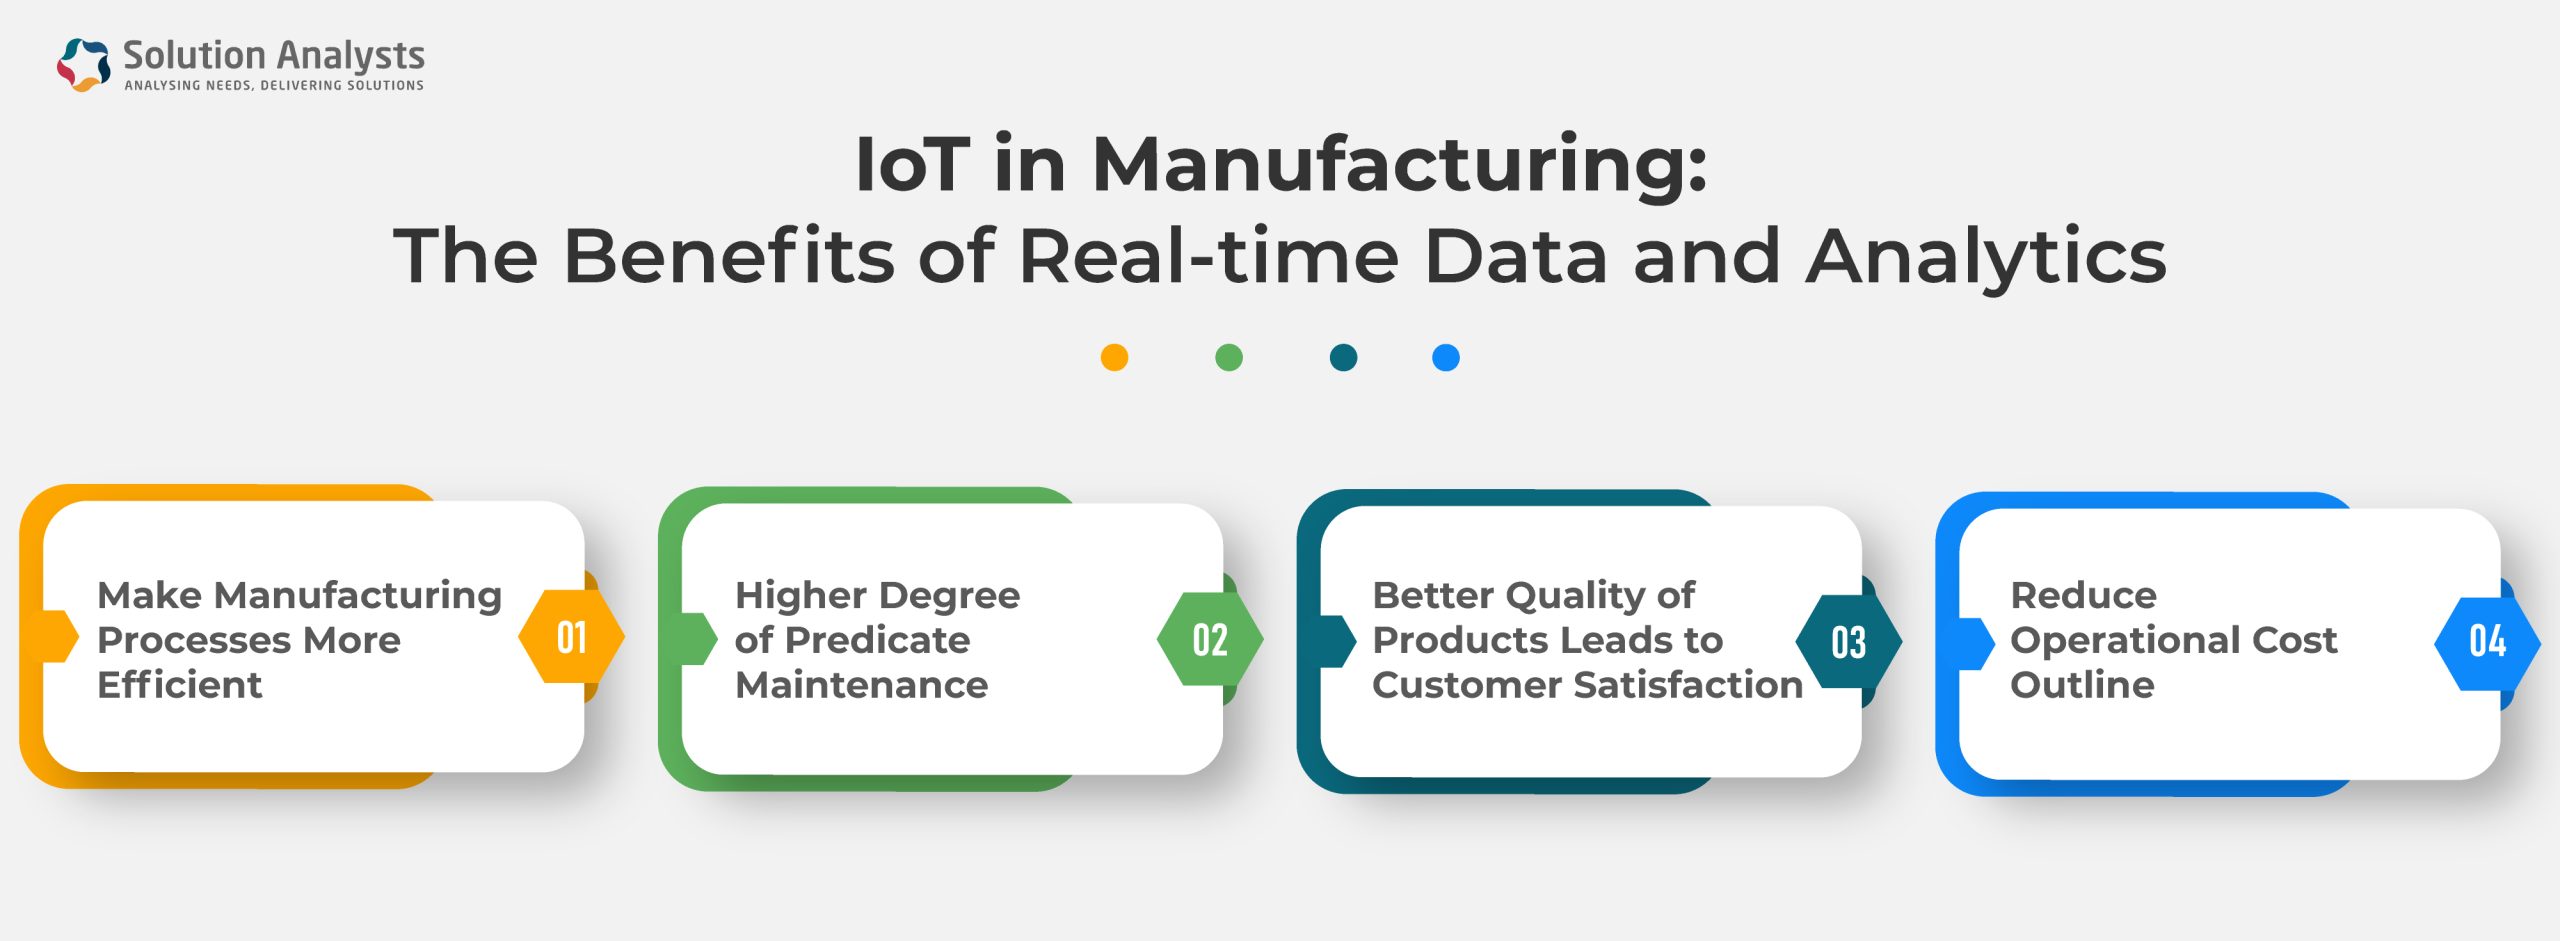 IoT and real-time data analytics